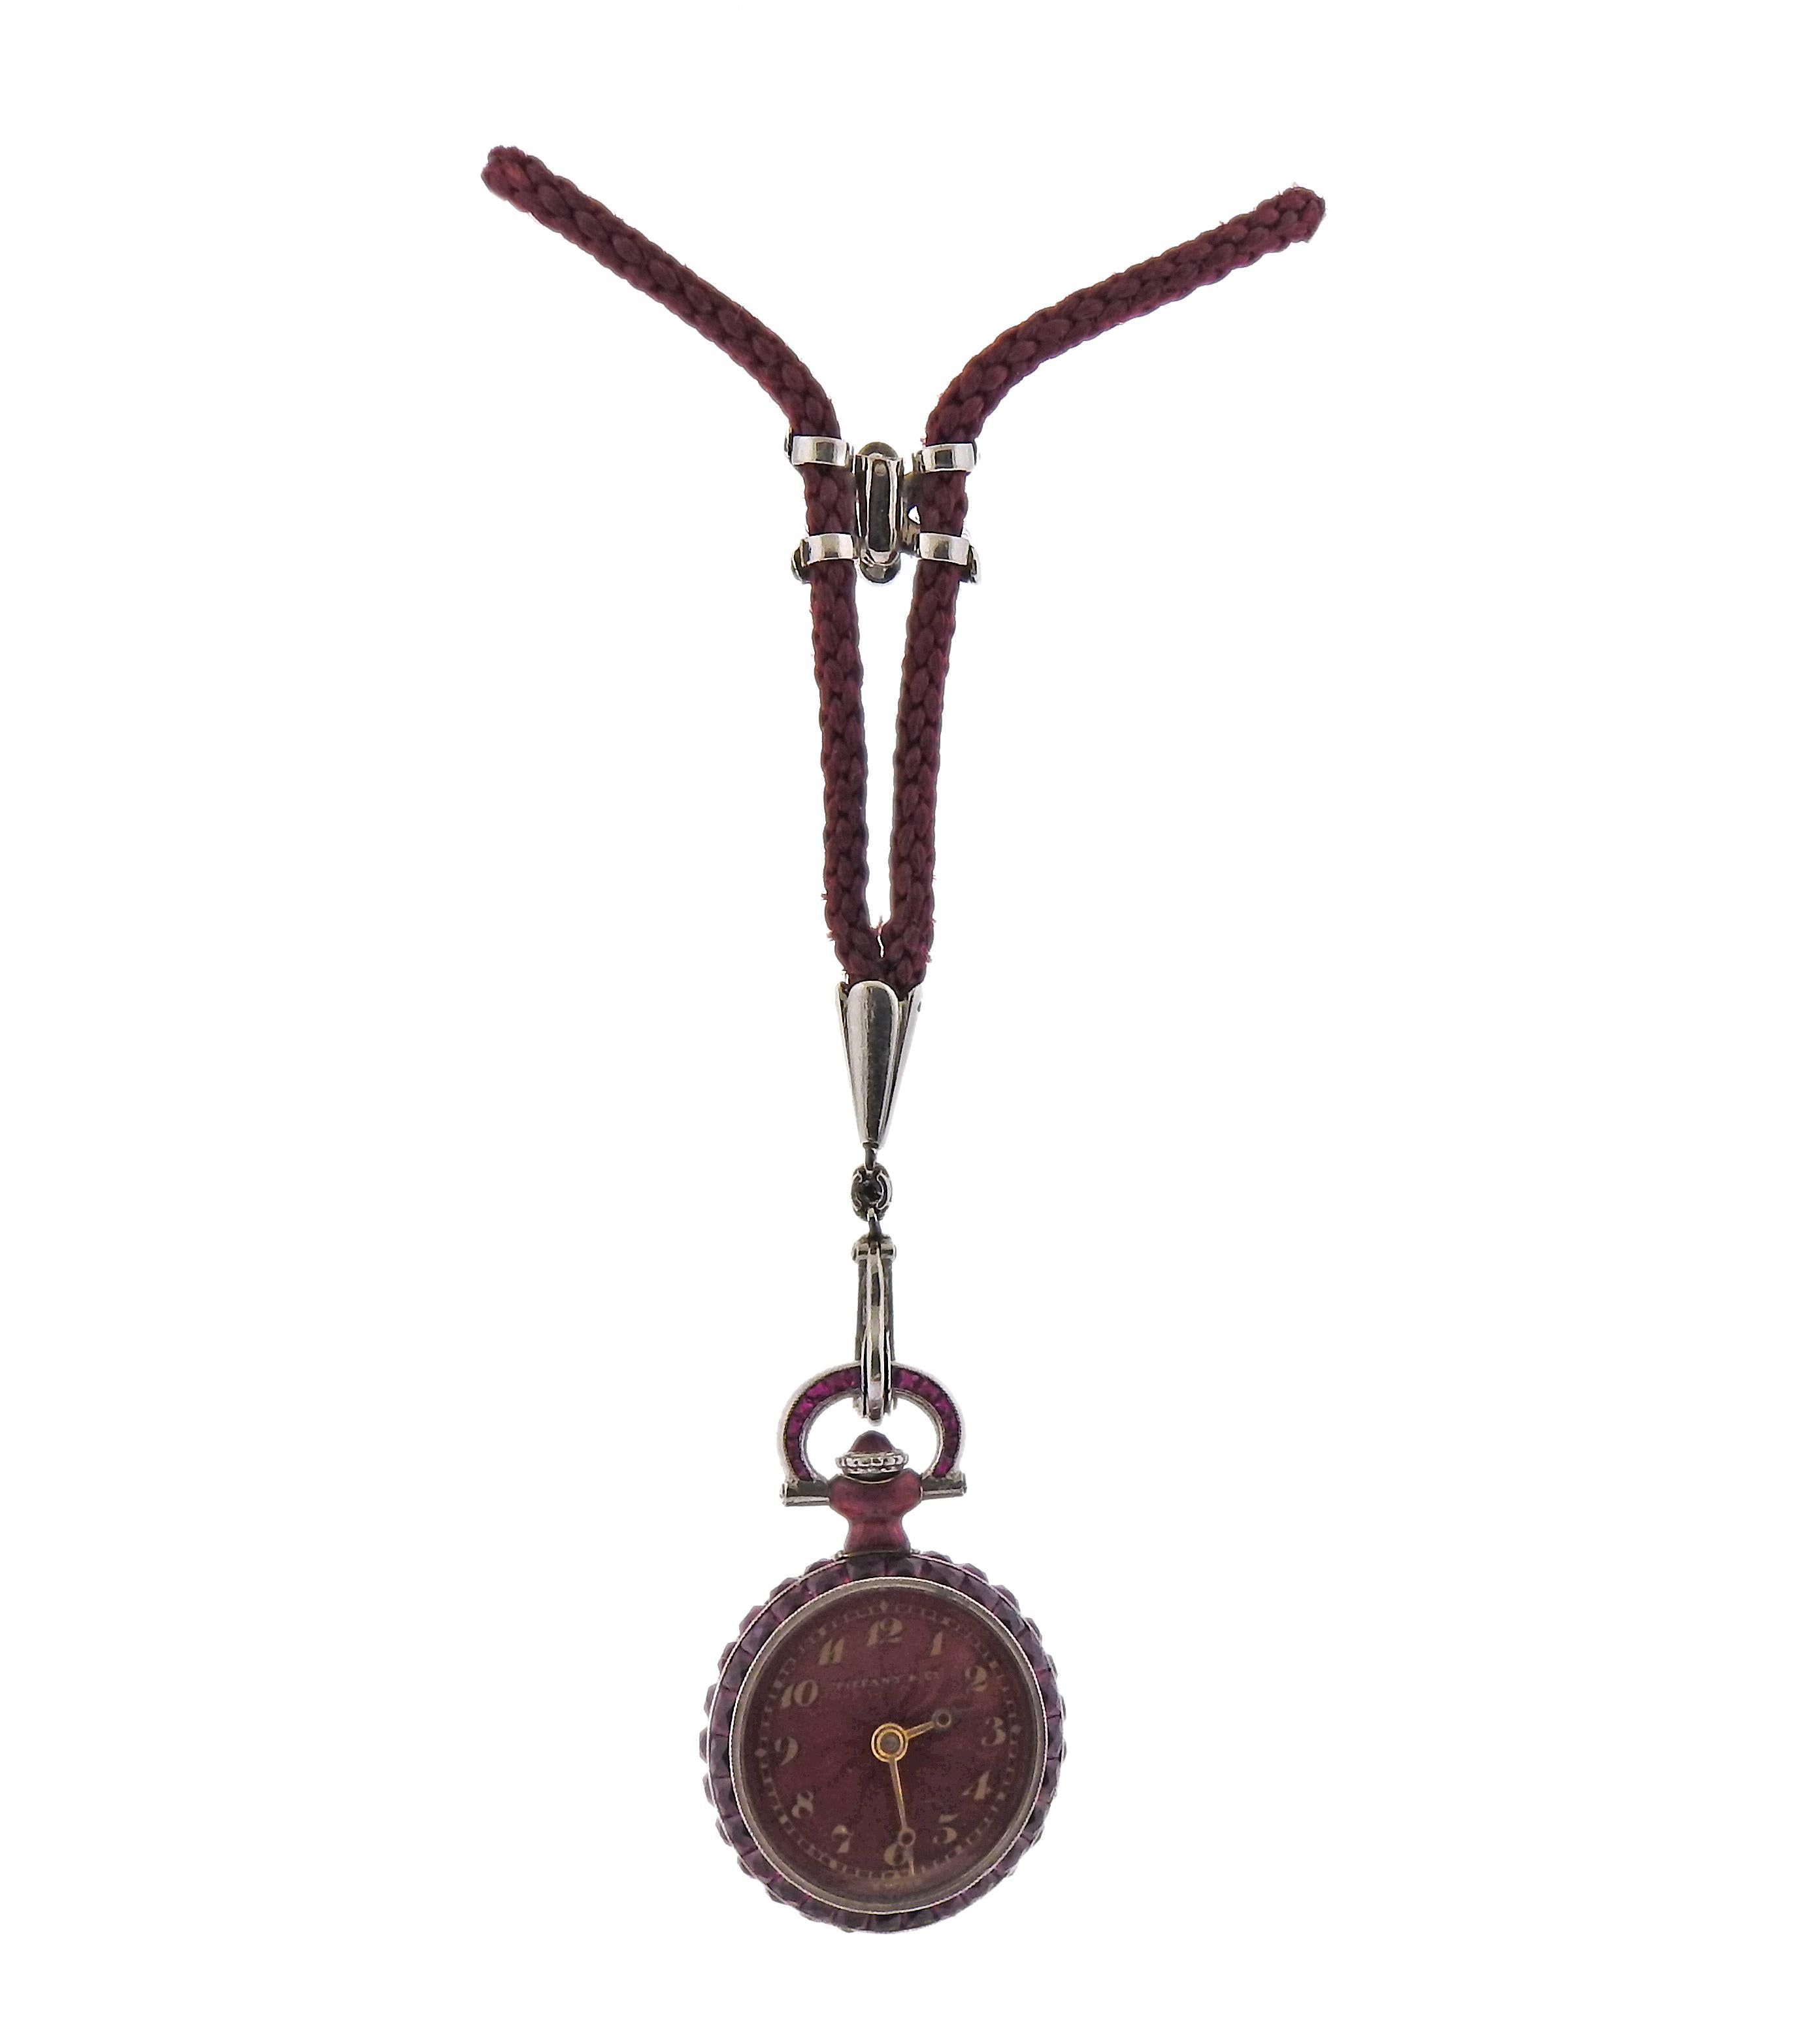 Antique platinum Tiffany & Co pocket watch, suspended on a cord necklace. Case adorned with rubies and diamonds. Case measures 18mm in diamonds. 28